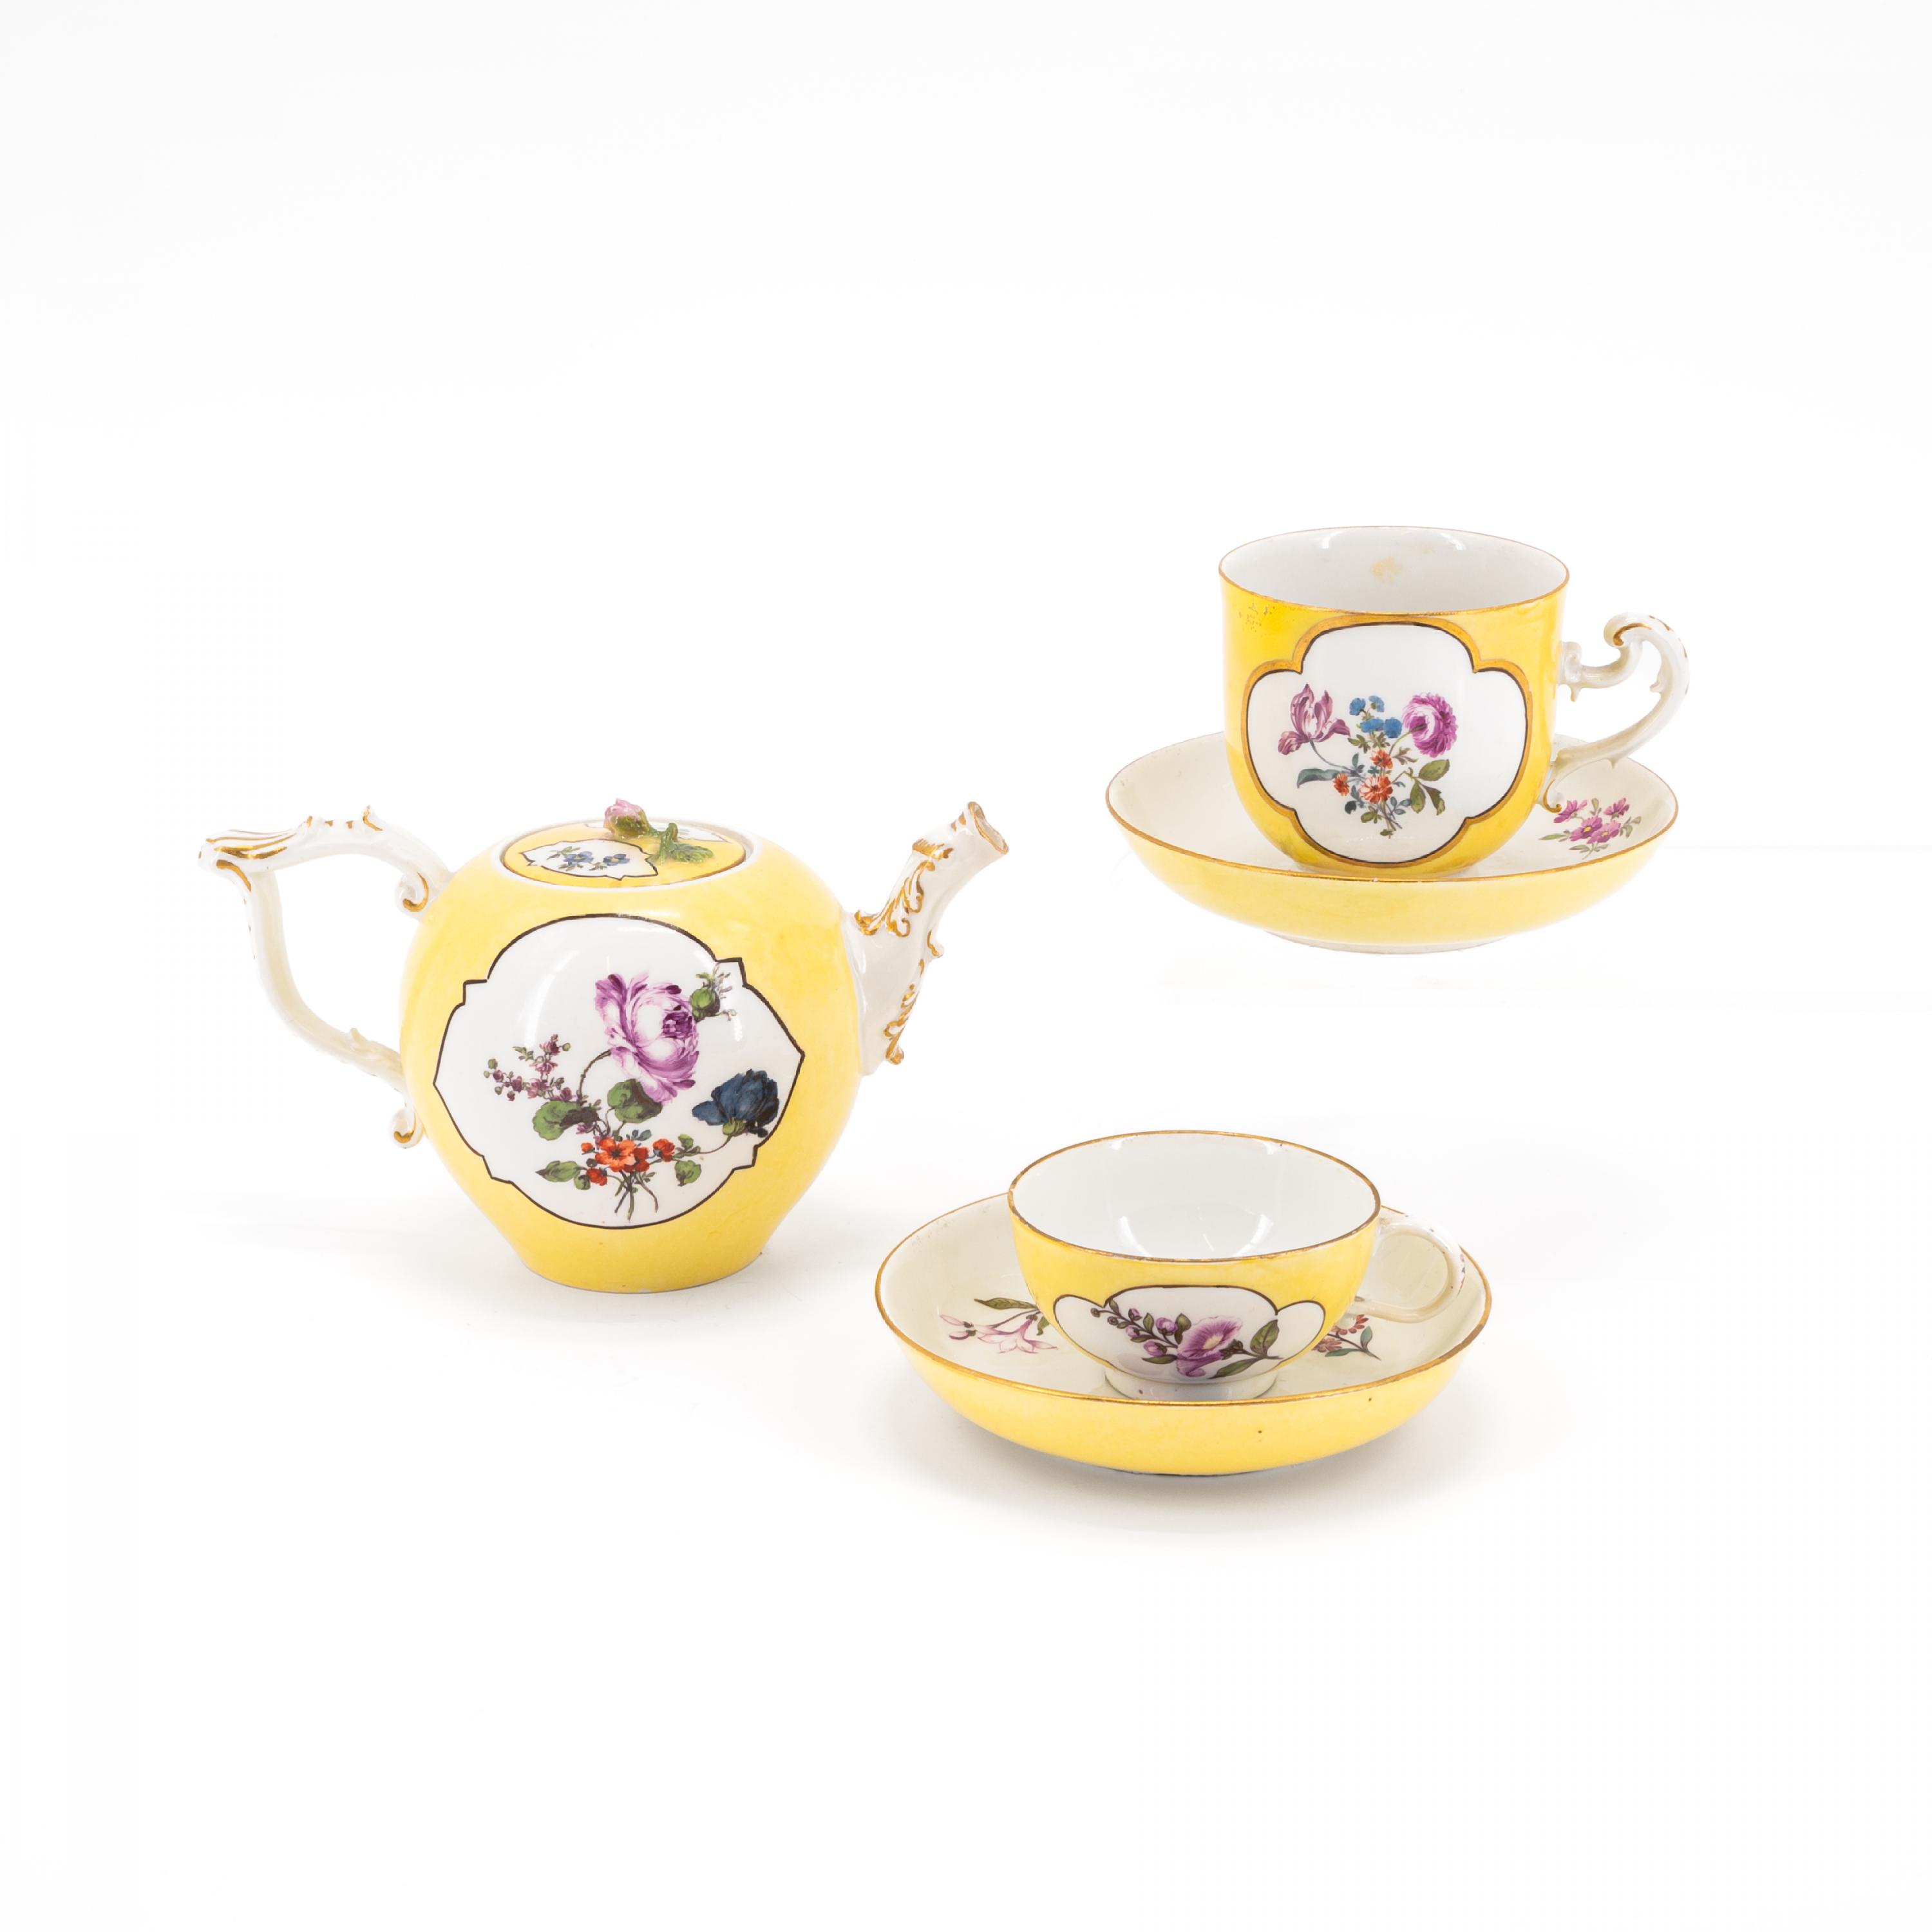 PORCELAIN TEA POT, TWO CUPS AND SAUCERS WITH YELLOW GROUND AND OMBRÉ FLORAL PAINTING